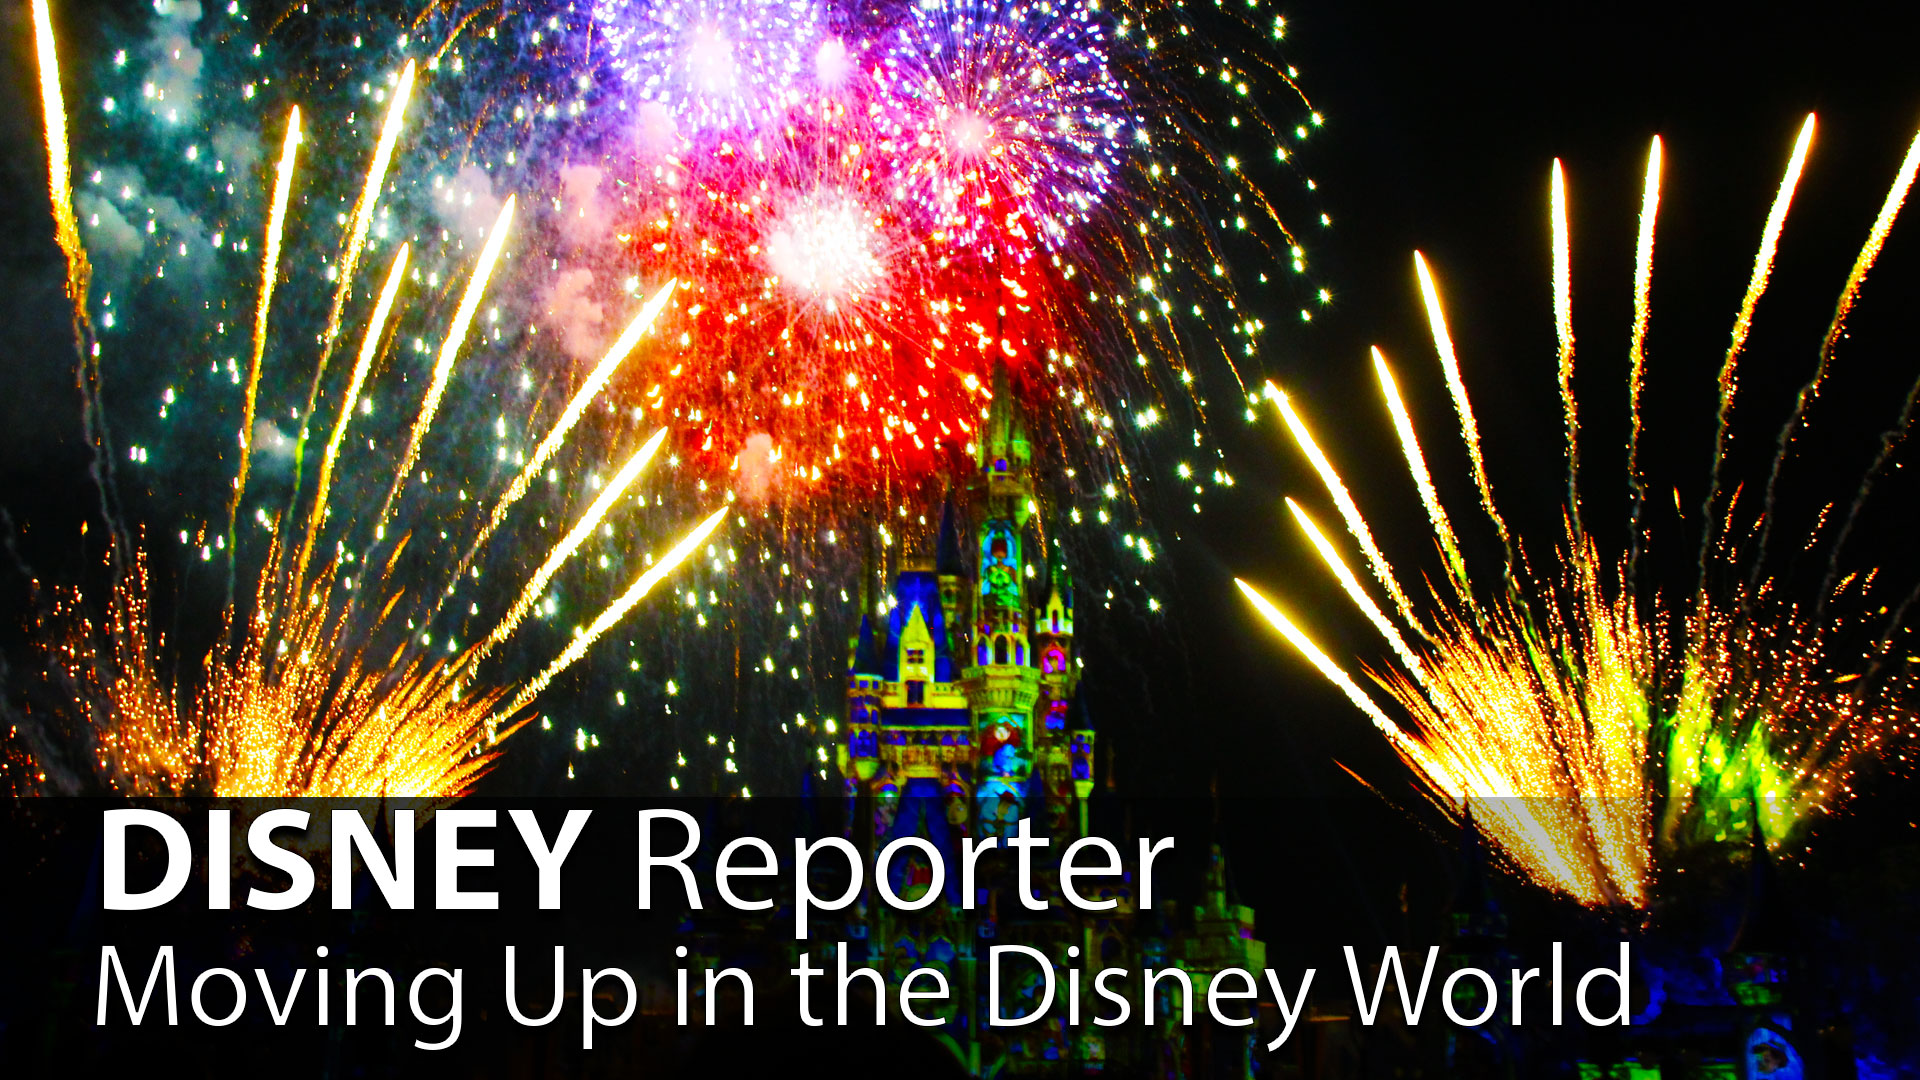 Moving Up in the Disney World – DISNEY Reporter